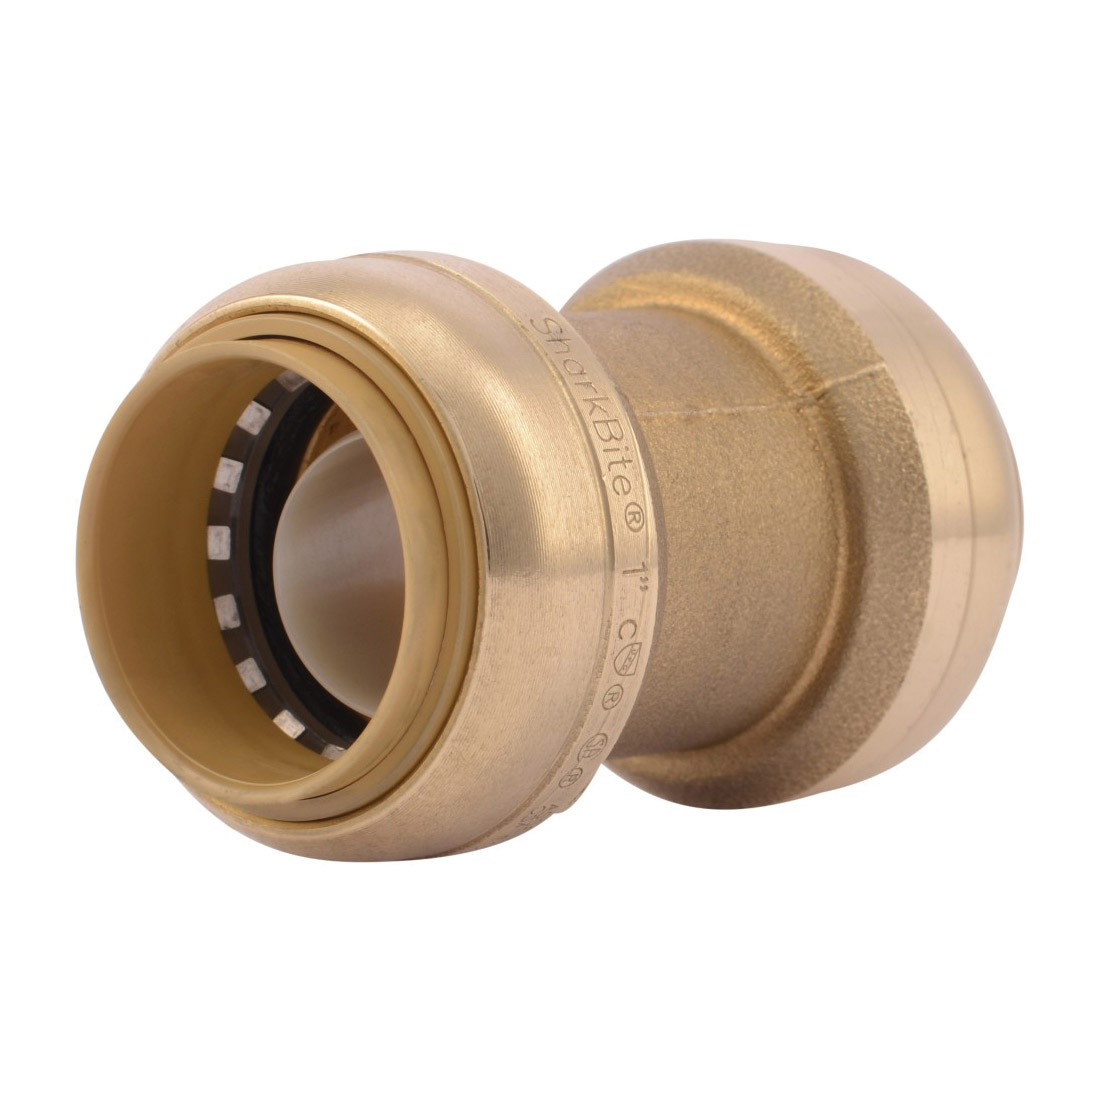 Sharkbite® U020LF Straight Pipe Coupling, 1 in Nominal, Push-Fit End Style, Brass, Import